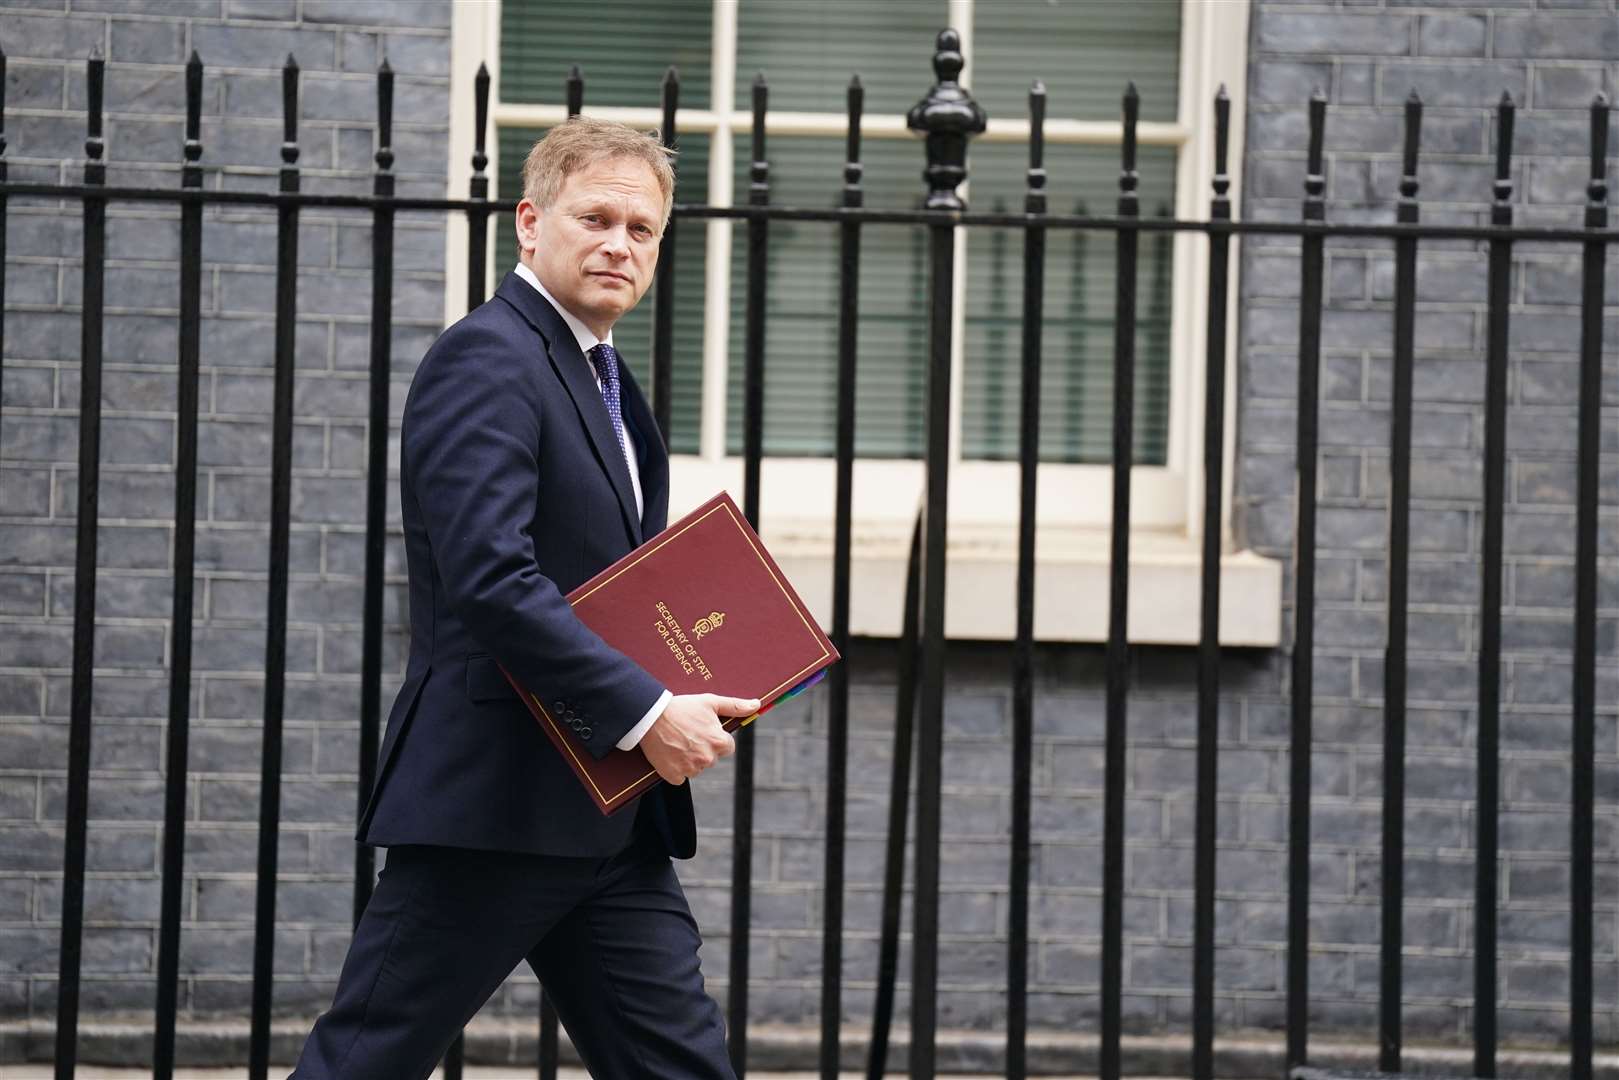 As transport secretary Mr Shapps introduced rail reforms (James Manning/PA)